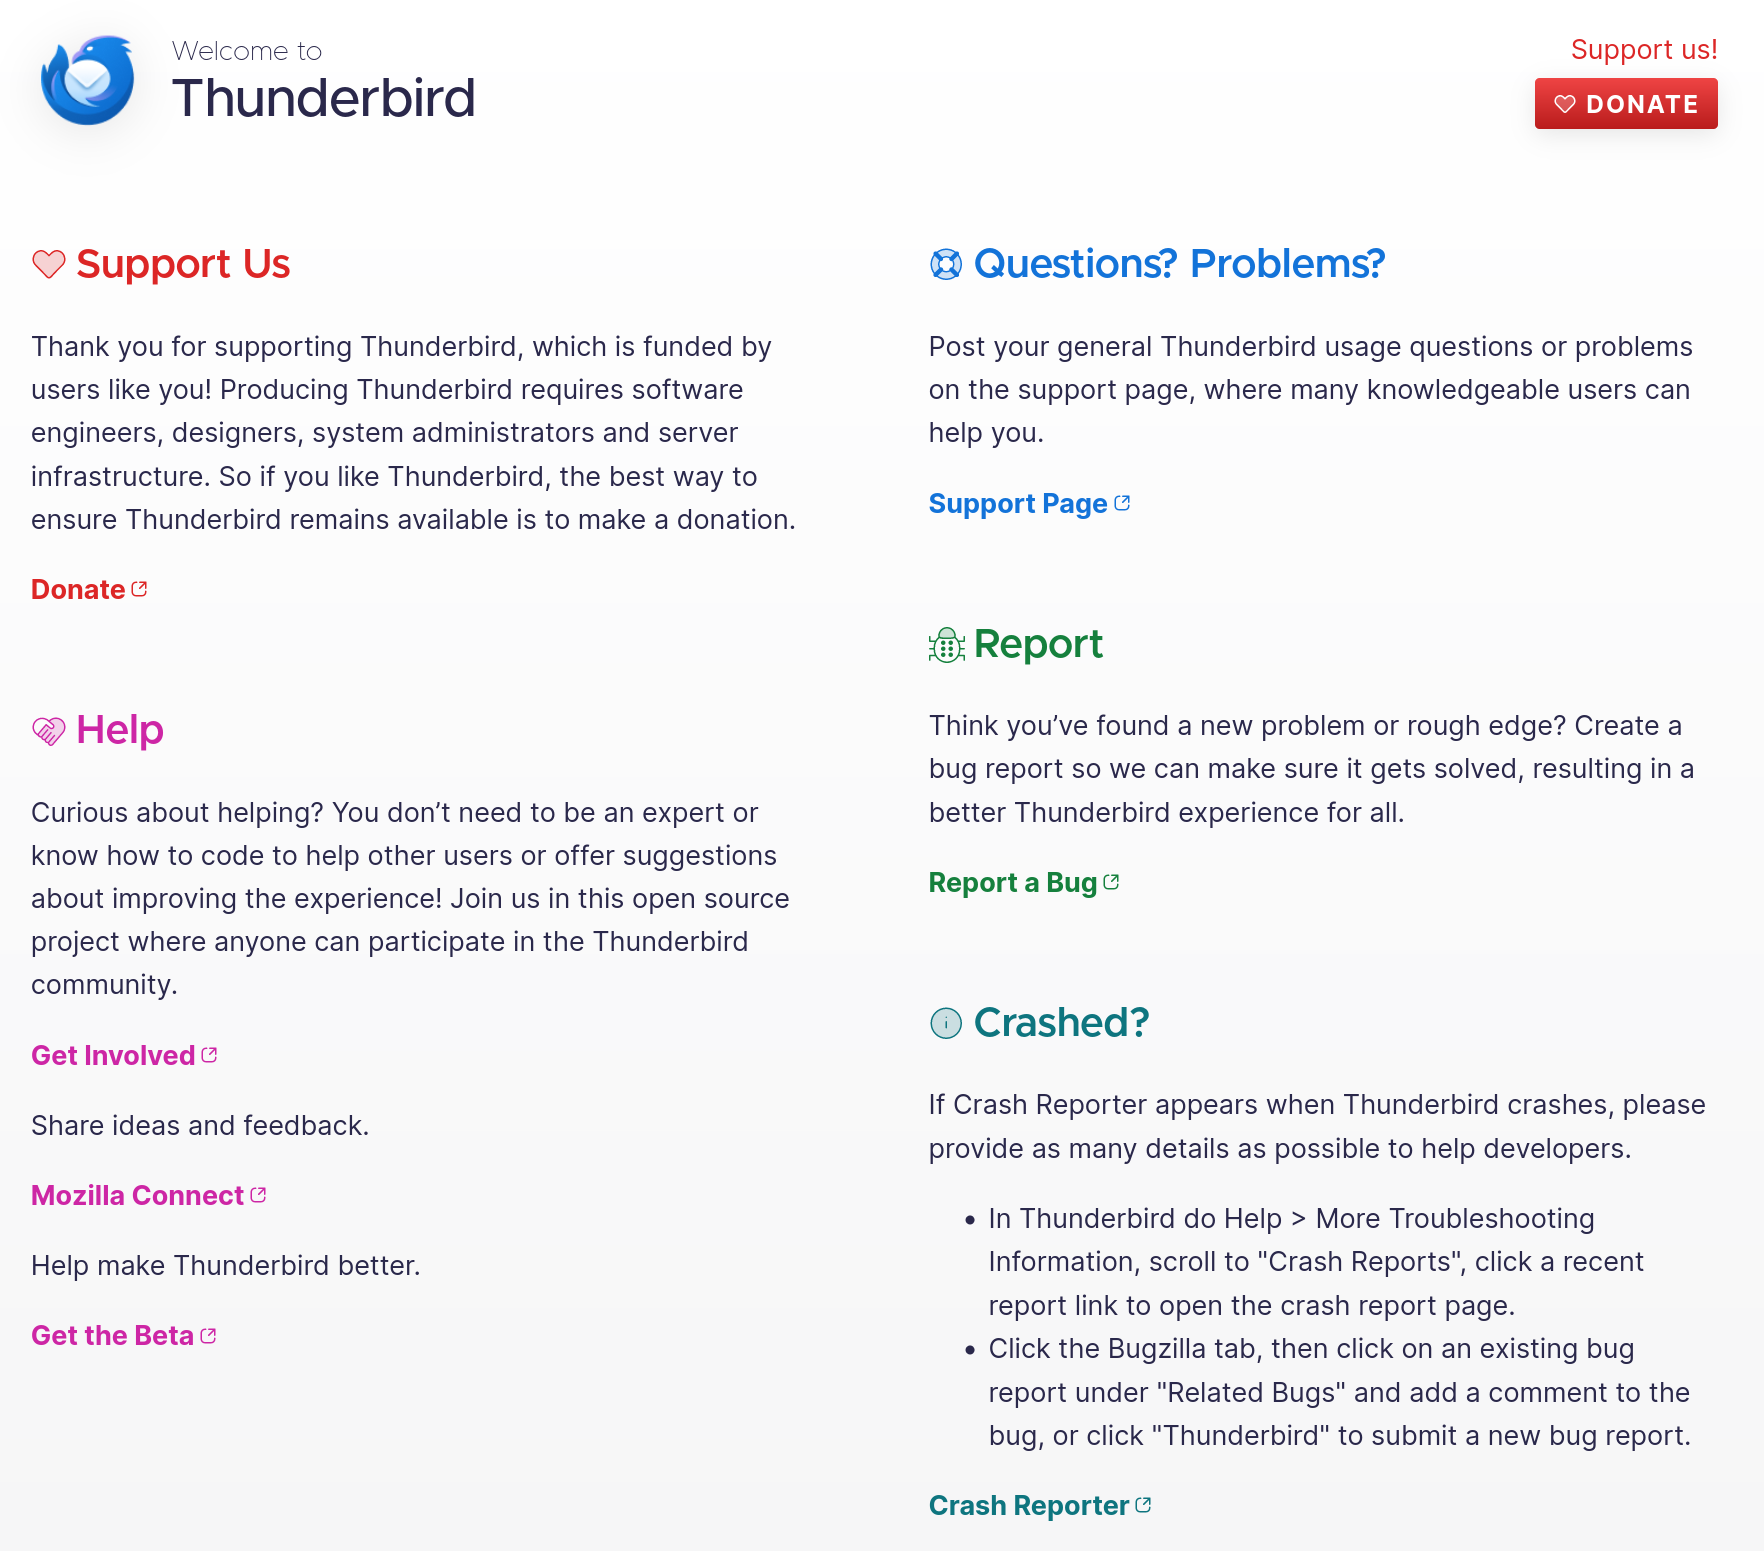 Thunderbird's current Start Page, displayed when opening the software. It shows various links to donate, get support, report bugs, and contribute